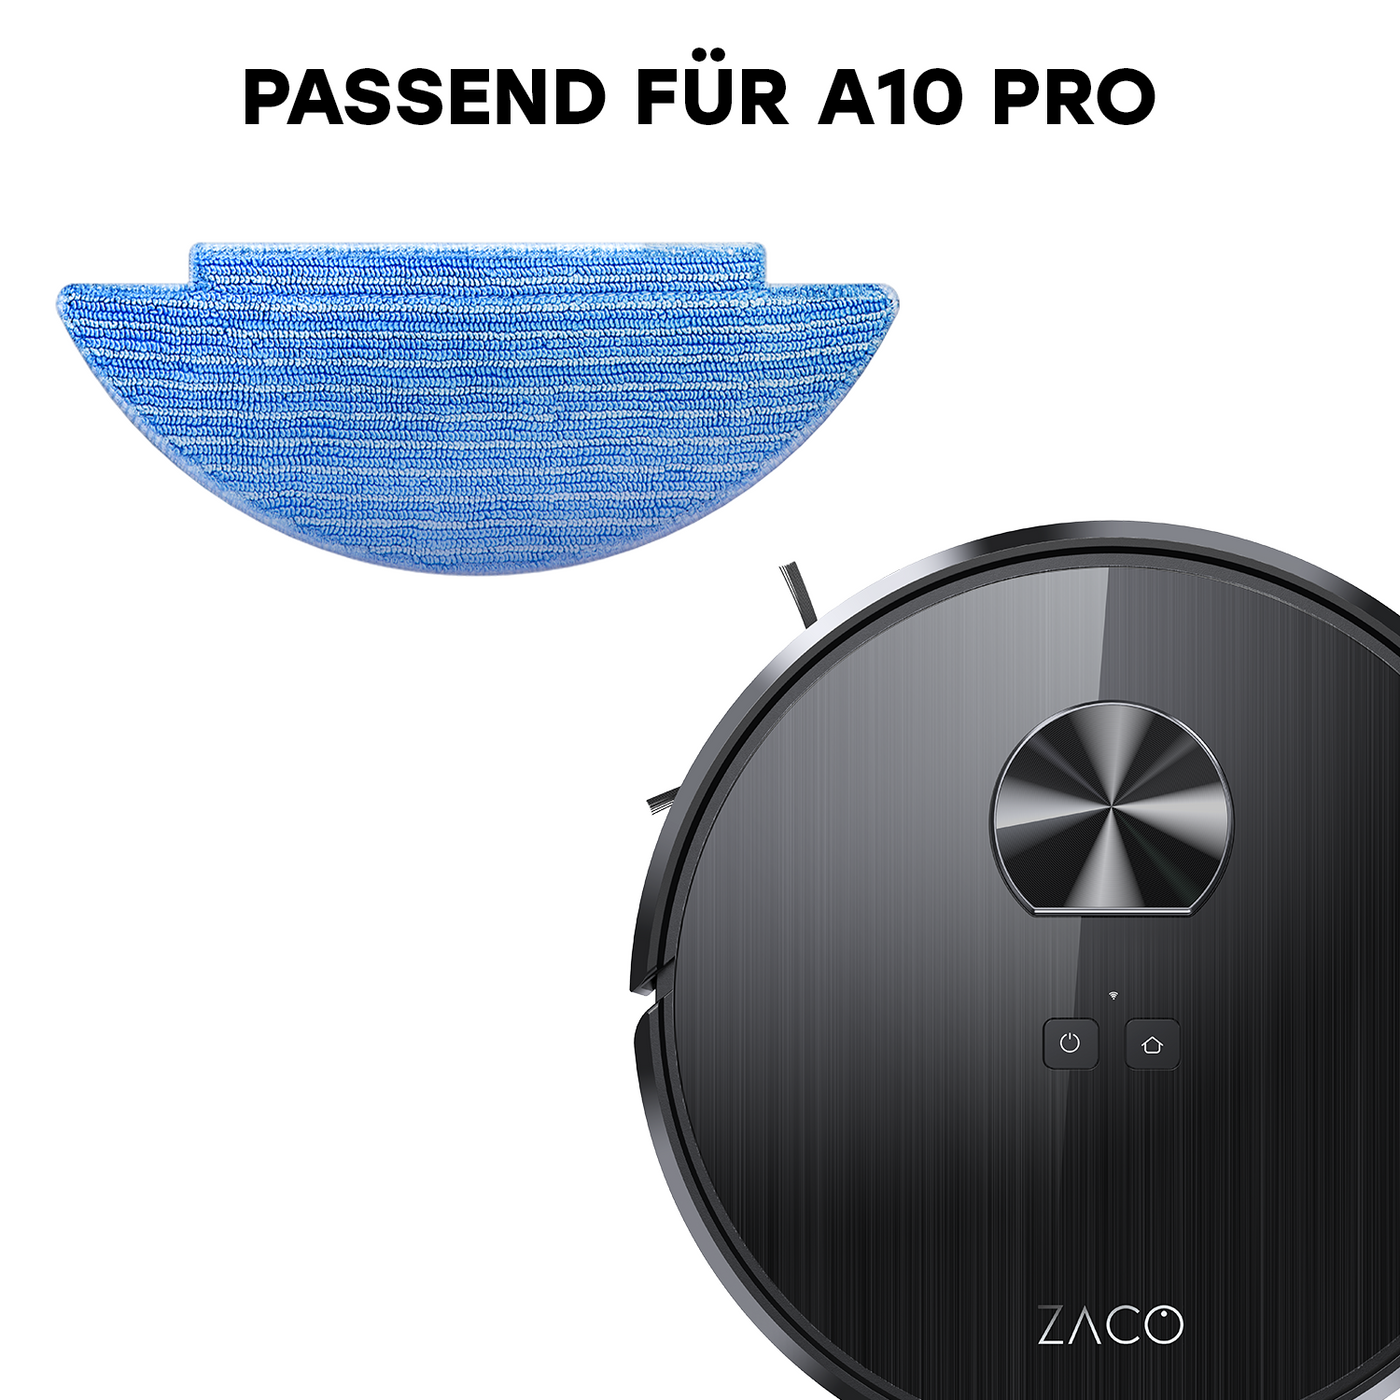 Replacement 3x microfiber cloths for ZACO A10 Pro